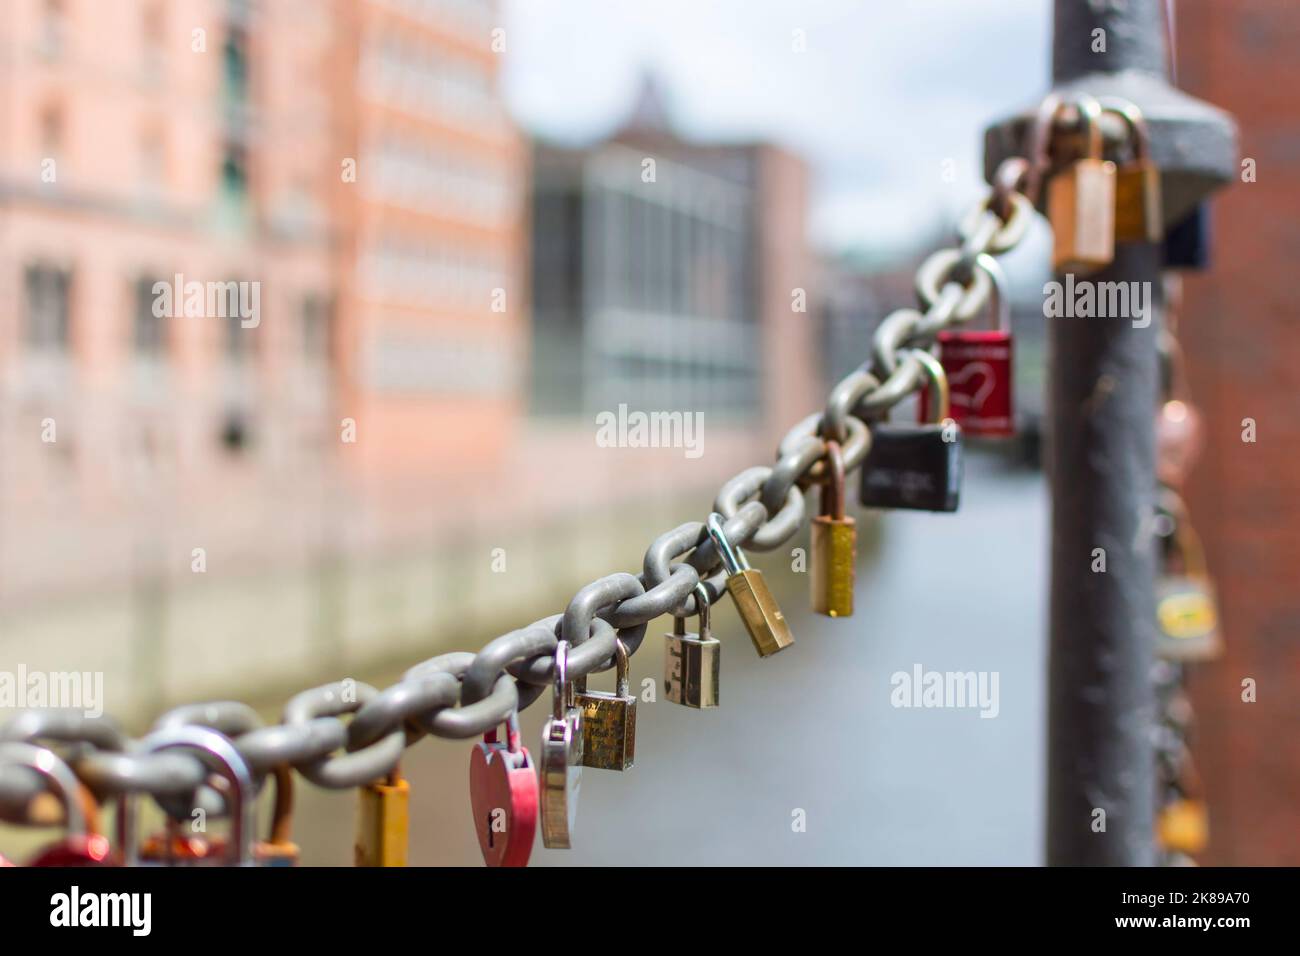 On an old link chain of the Speicherstadt in Hamburg hang many colorful so-called love locks in different shapes. The chain stands out against the Stock Photo